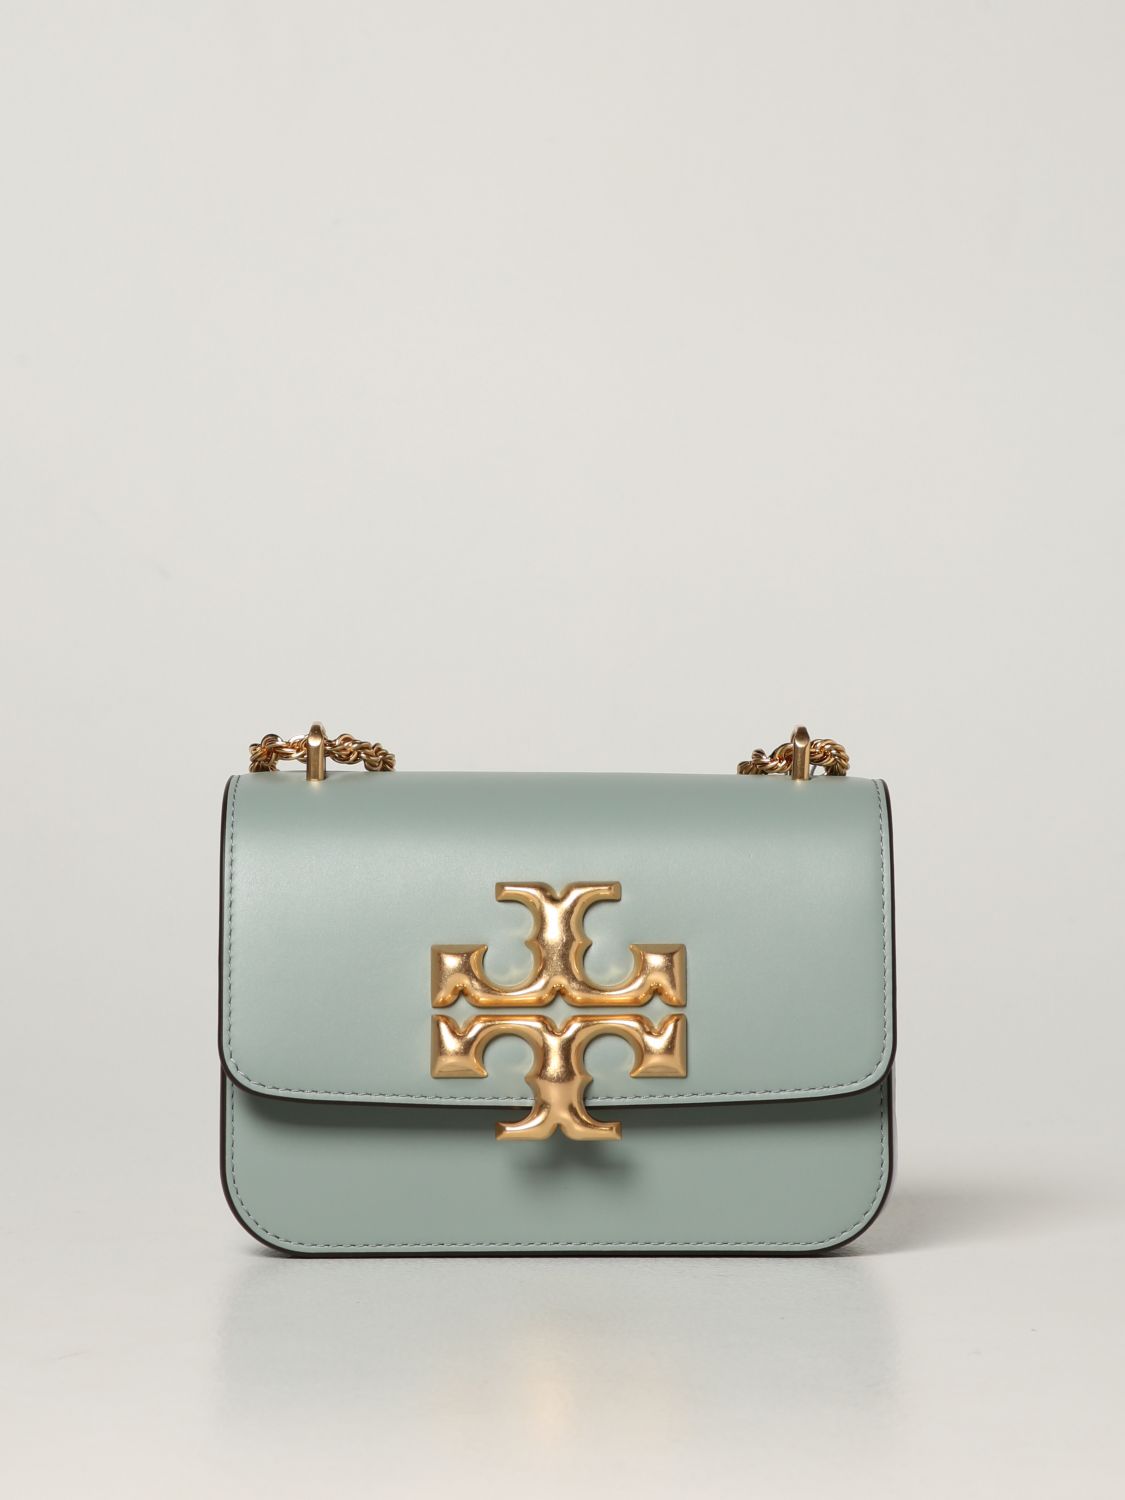 TORY BURCH: Small Eleanor leather bag - Dust | Tory Burch mini bag 73589  online on 